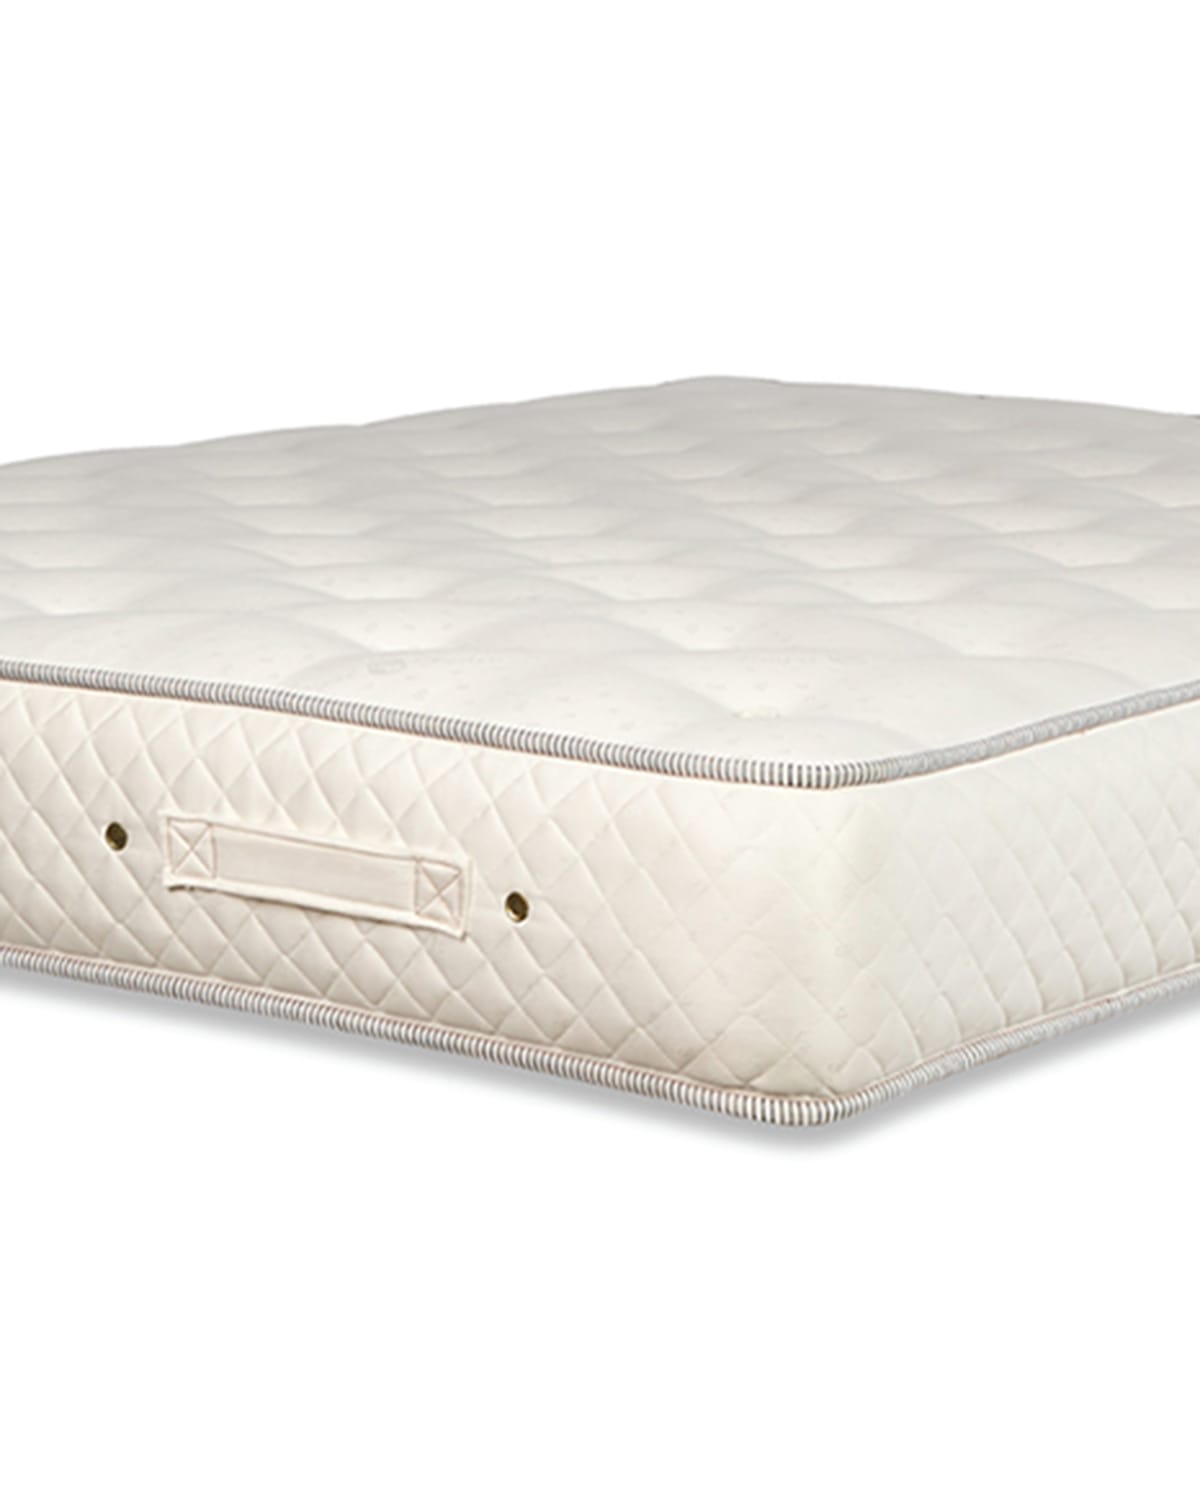 Royal-pedic Dream Spring Limited Firm Full Mattress In White